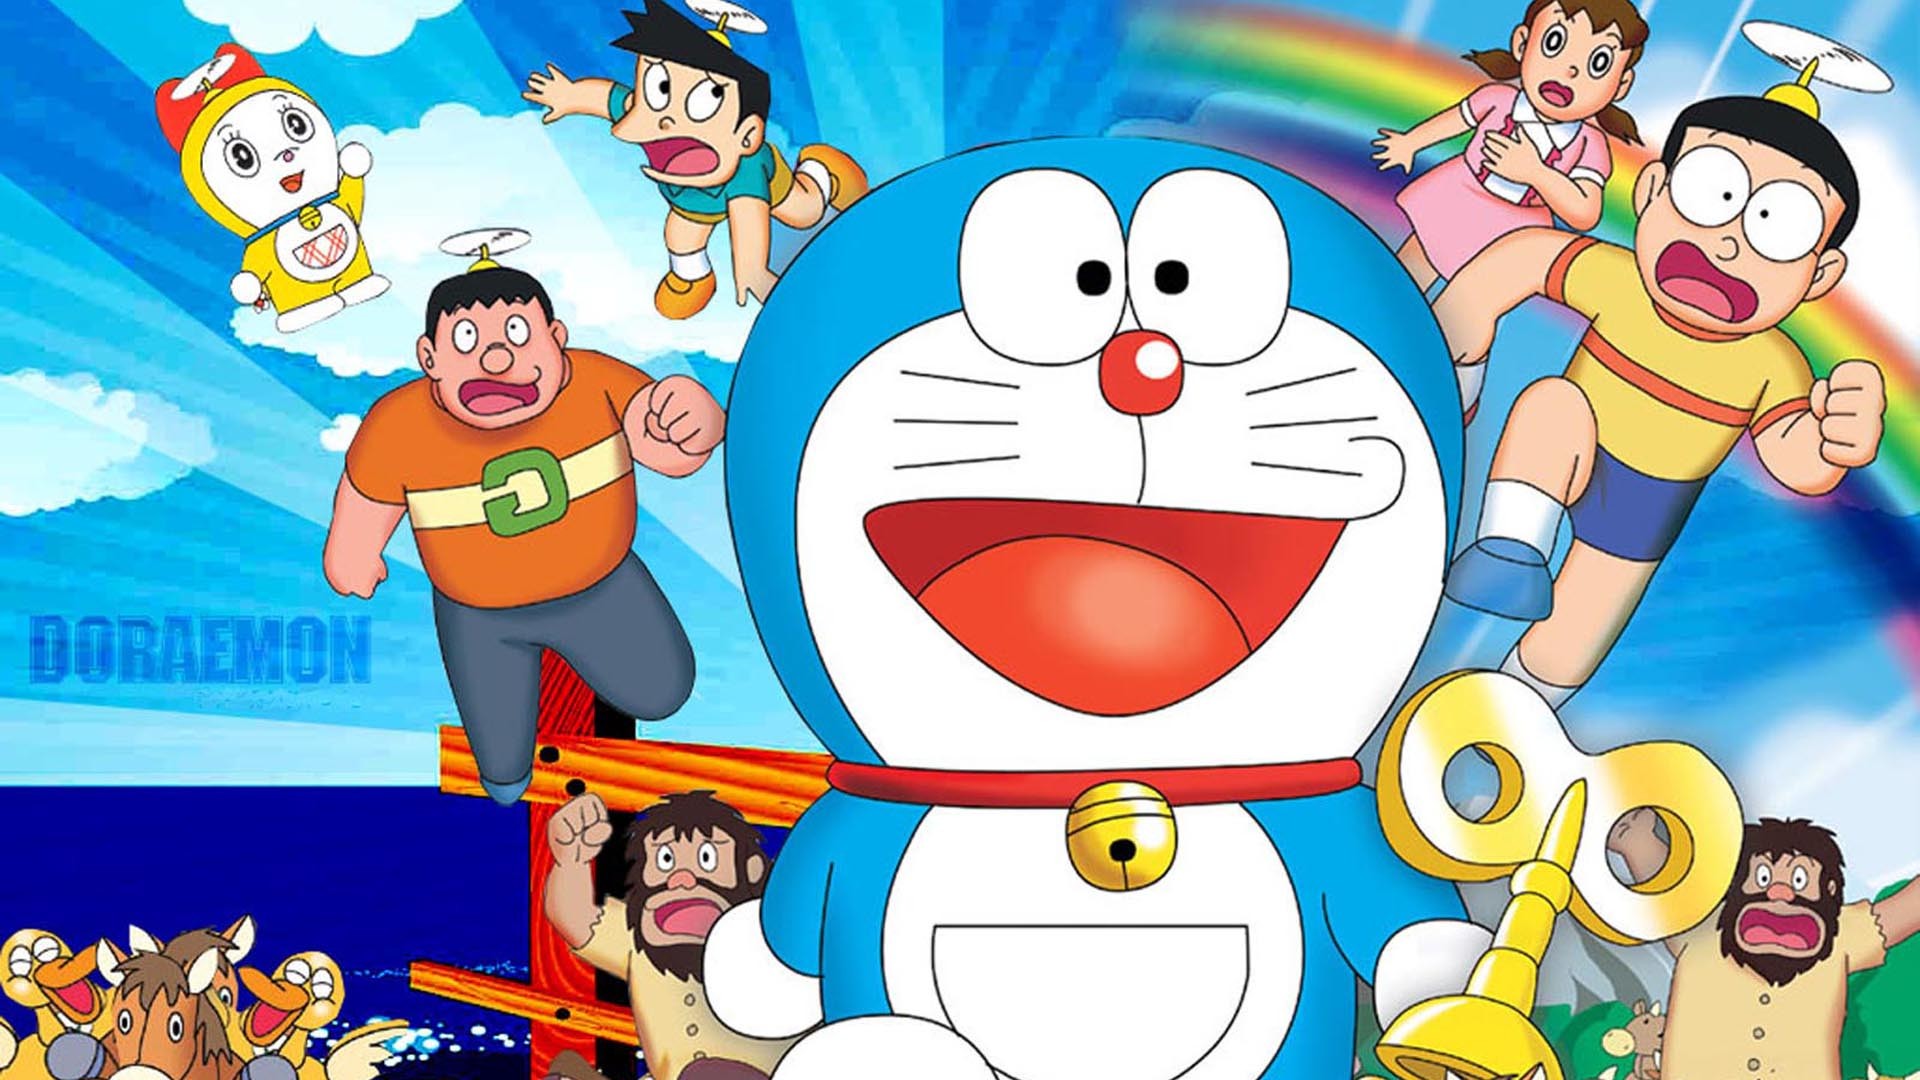 1920x1080 Doraemon HD Wallpapers - Get the Newest Collection of Doraemon HD Wallpapers  for your Desktop PCs